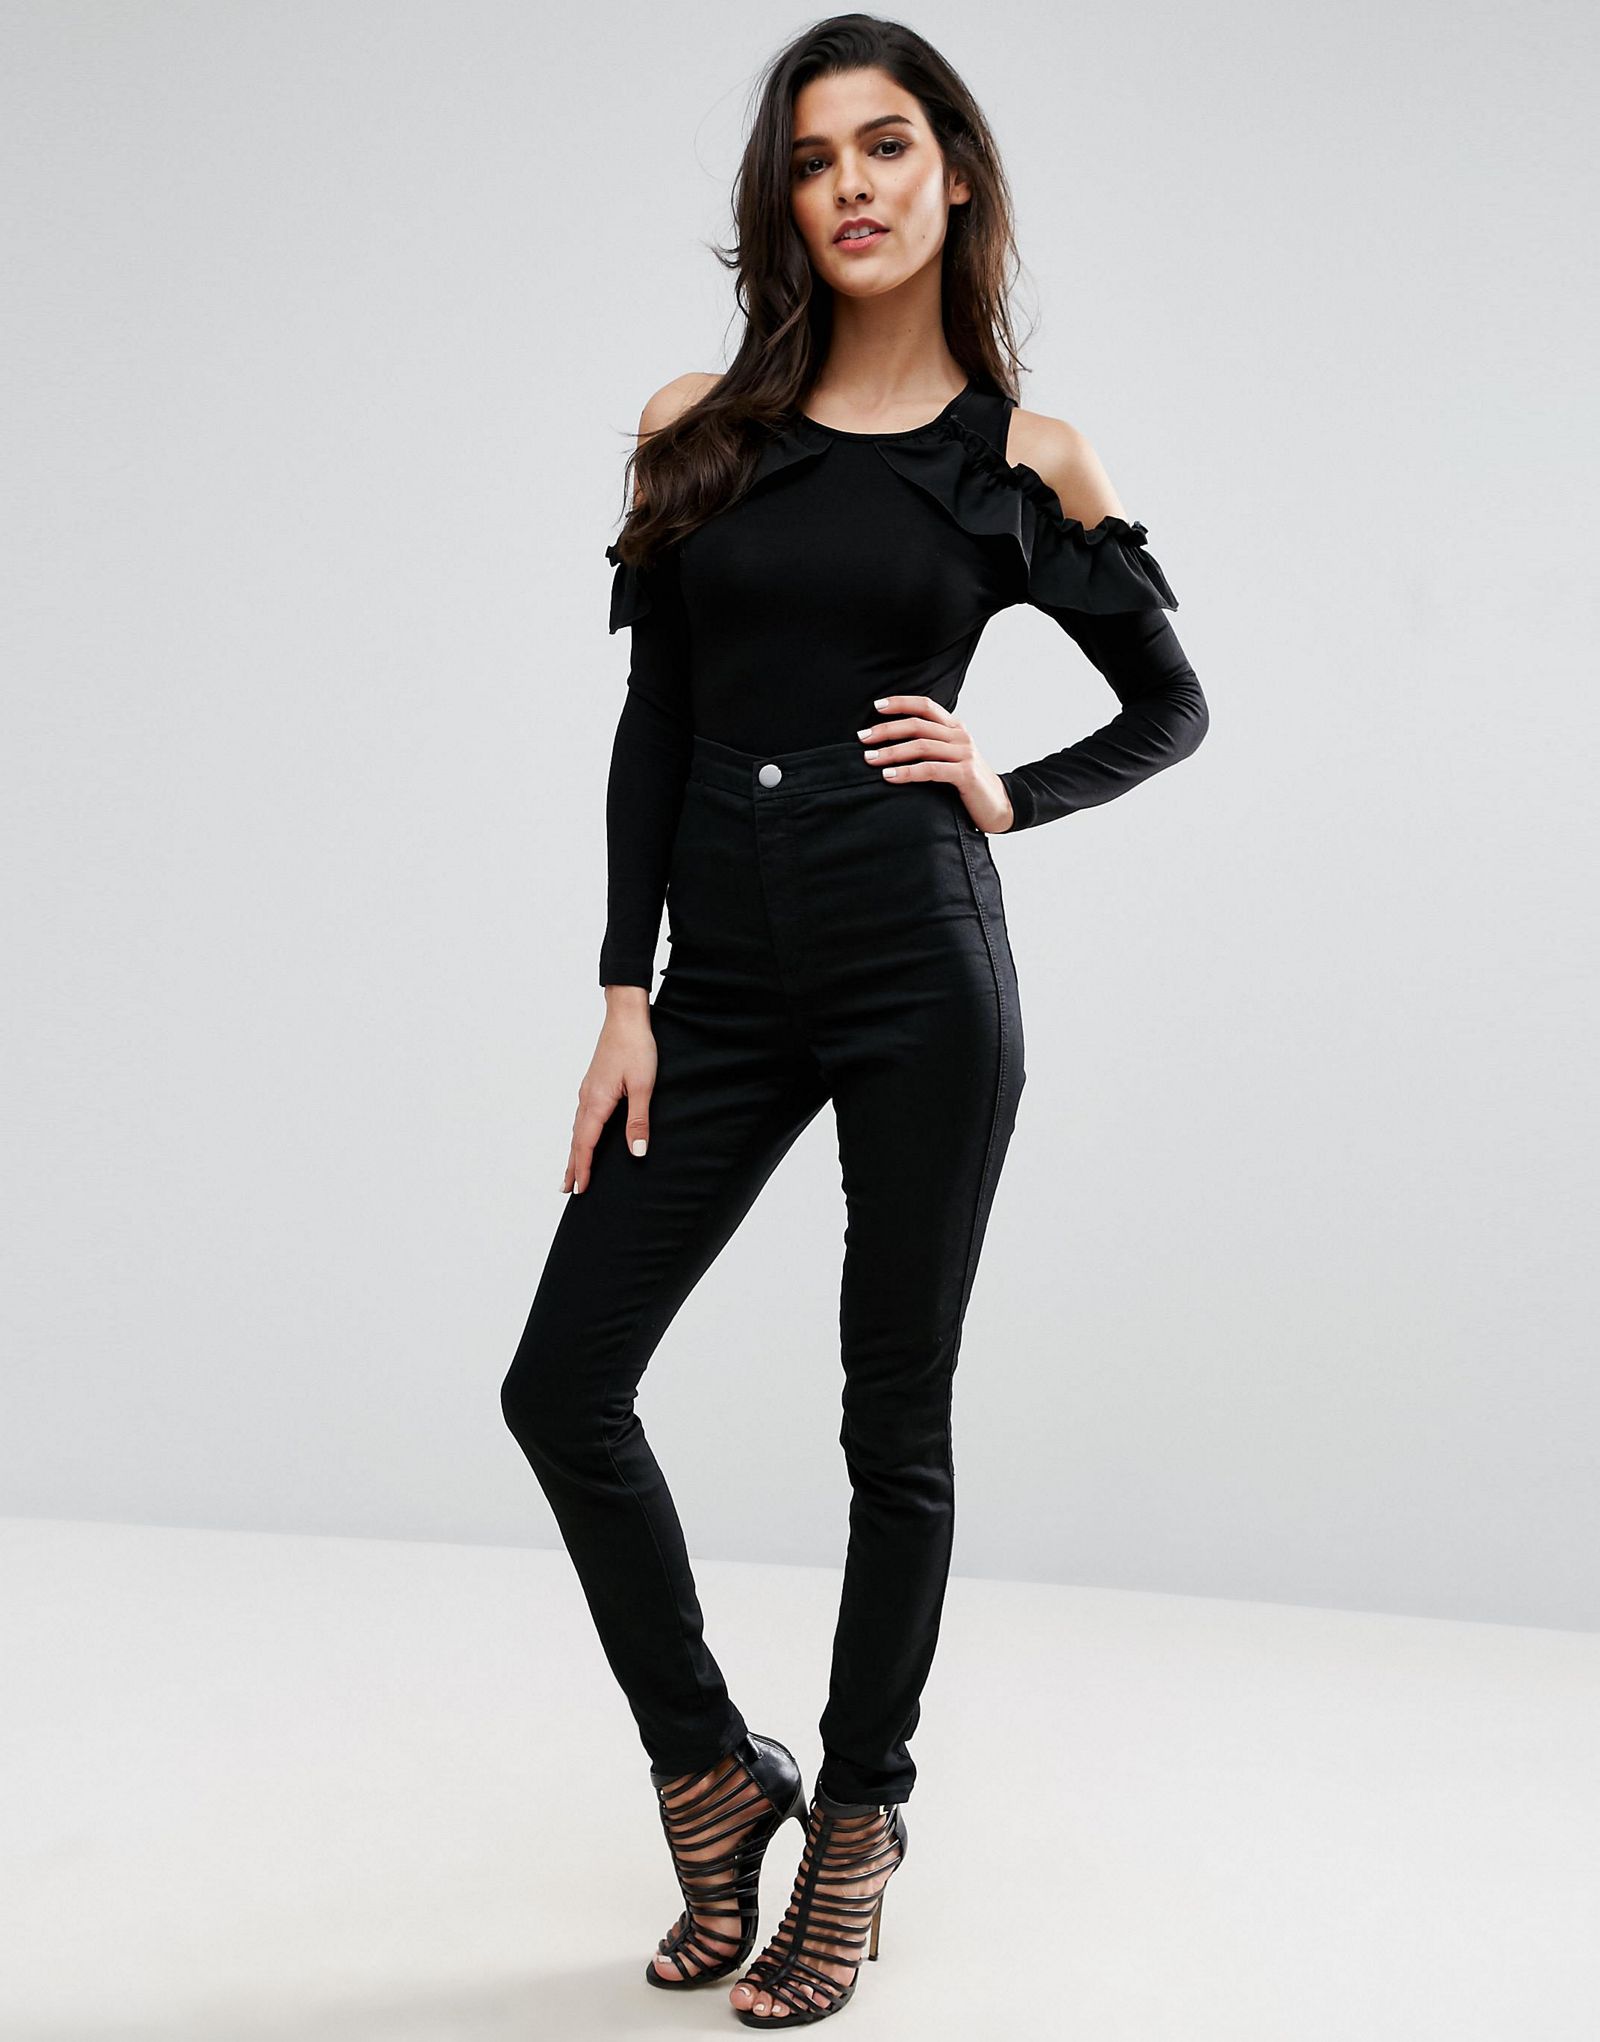 ASOS Body with Ruffle Cold Shoulder